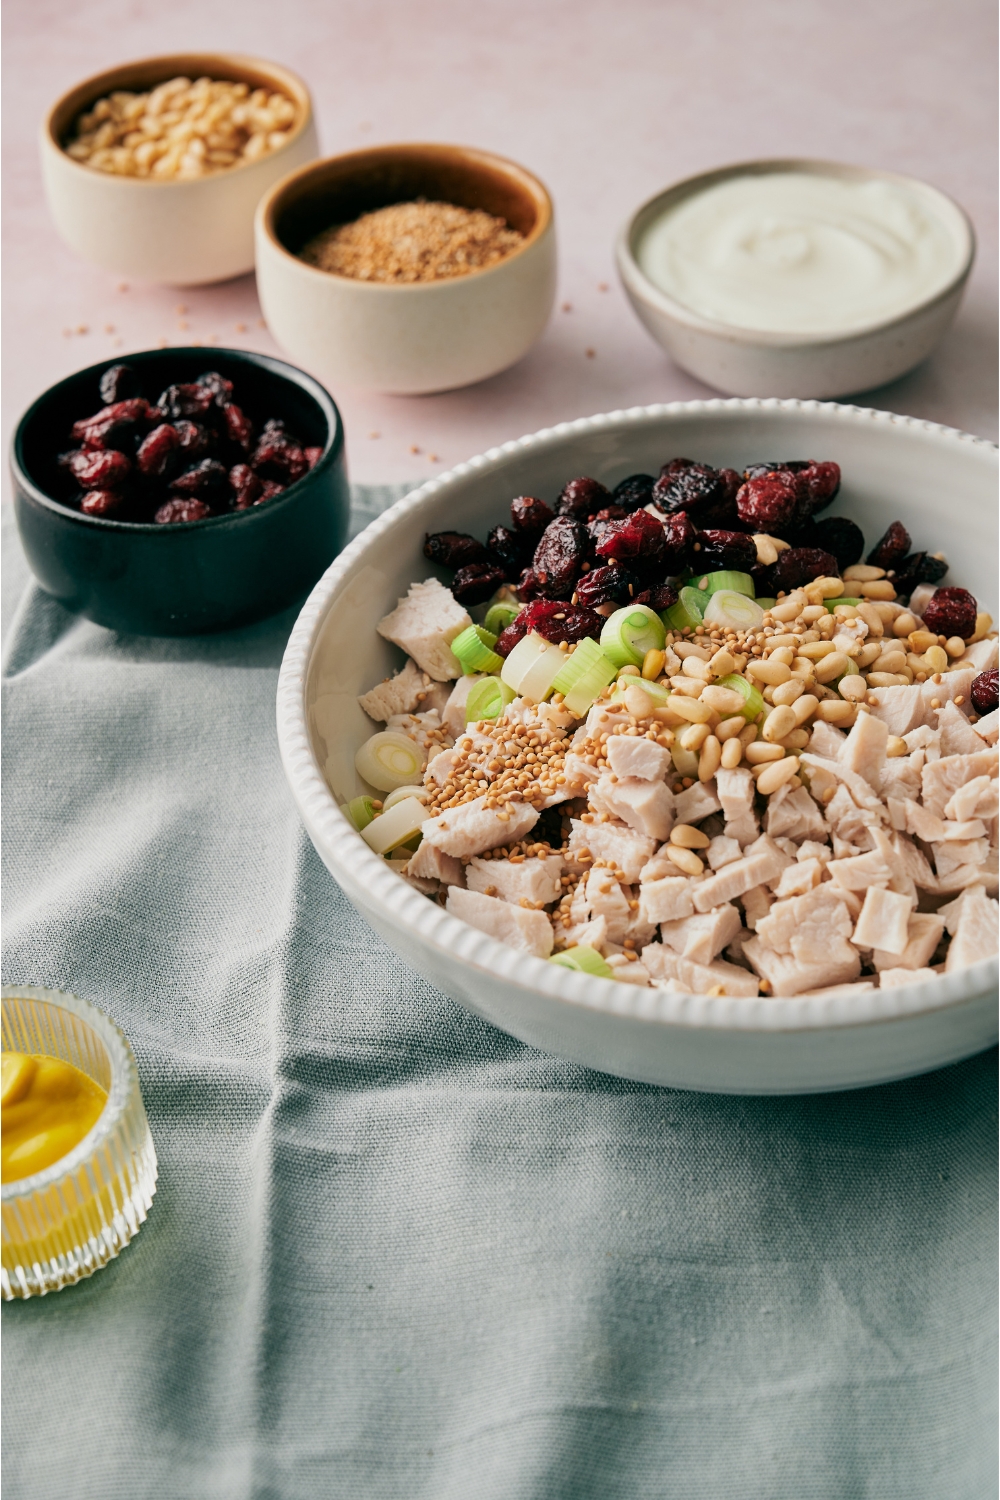 A bowl with diced chicken, mustard seeds, pine nuts, sliced green onion, and dried cranberries, next to smaller bowls of mayonnaise, mustard, dried cranberries, mustard seeds, and pine nuts.